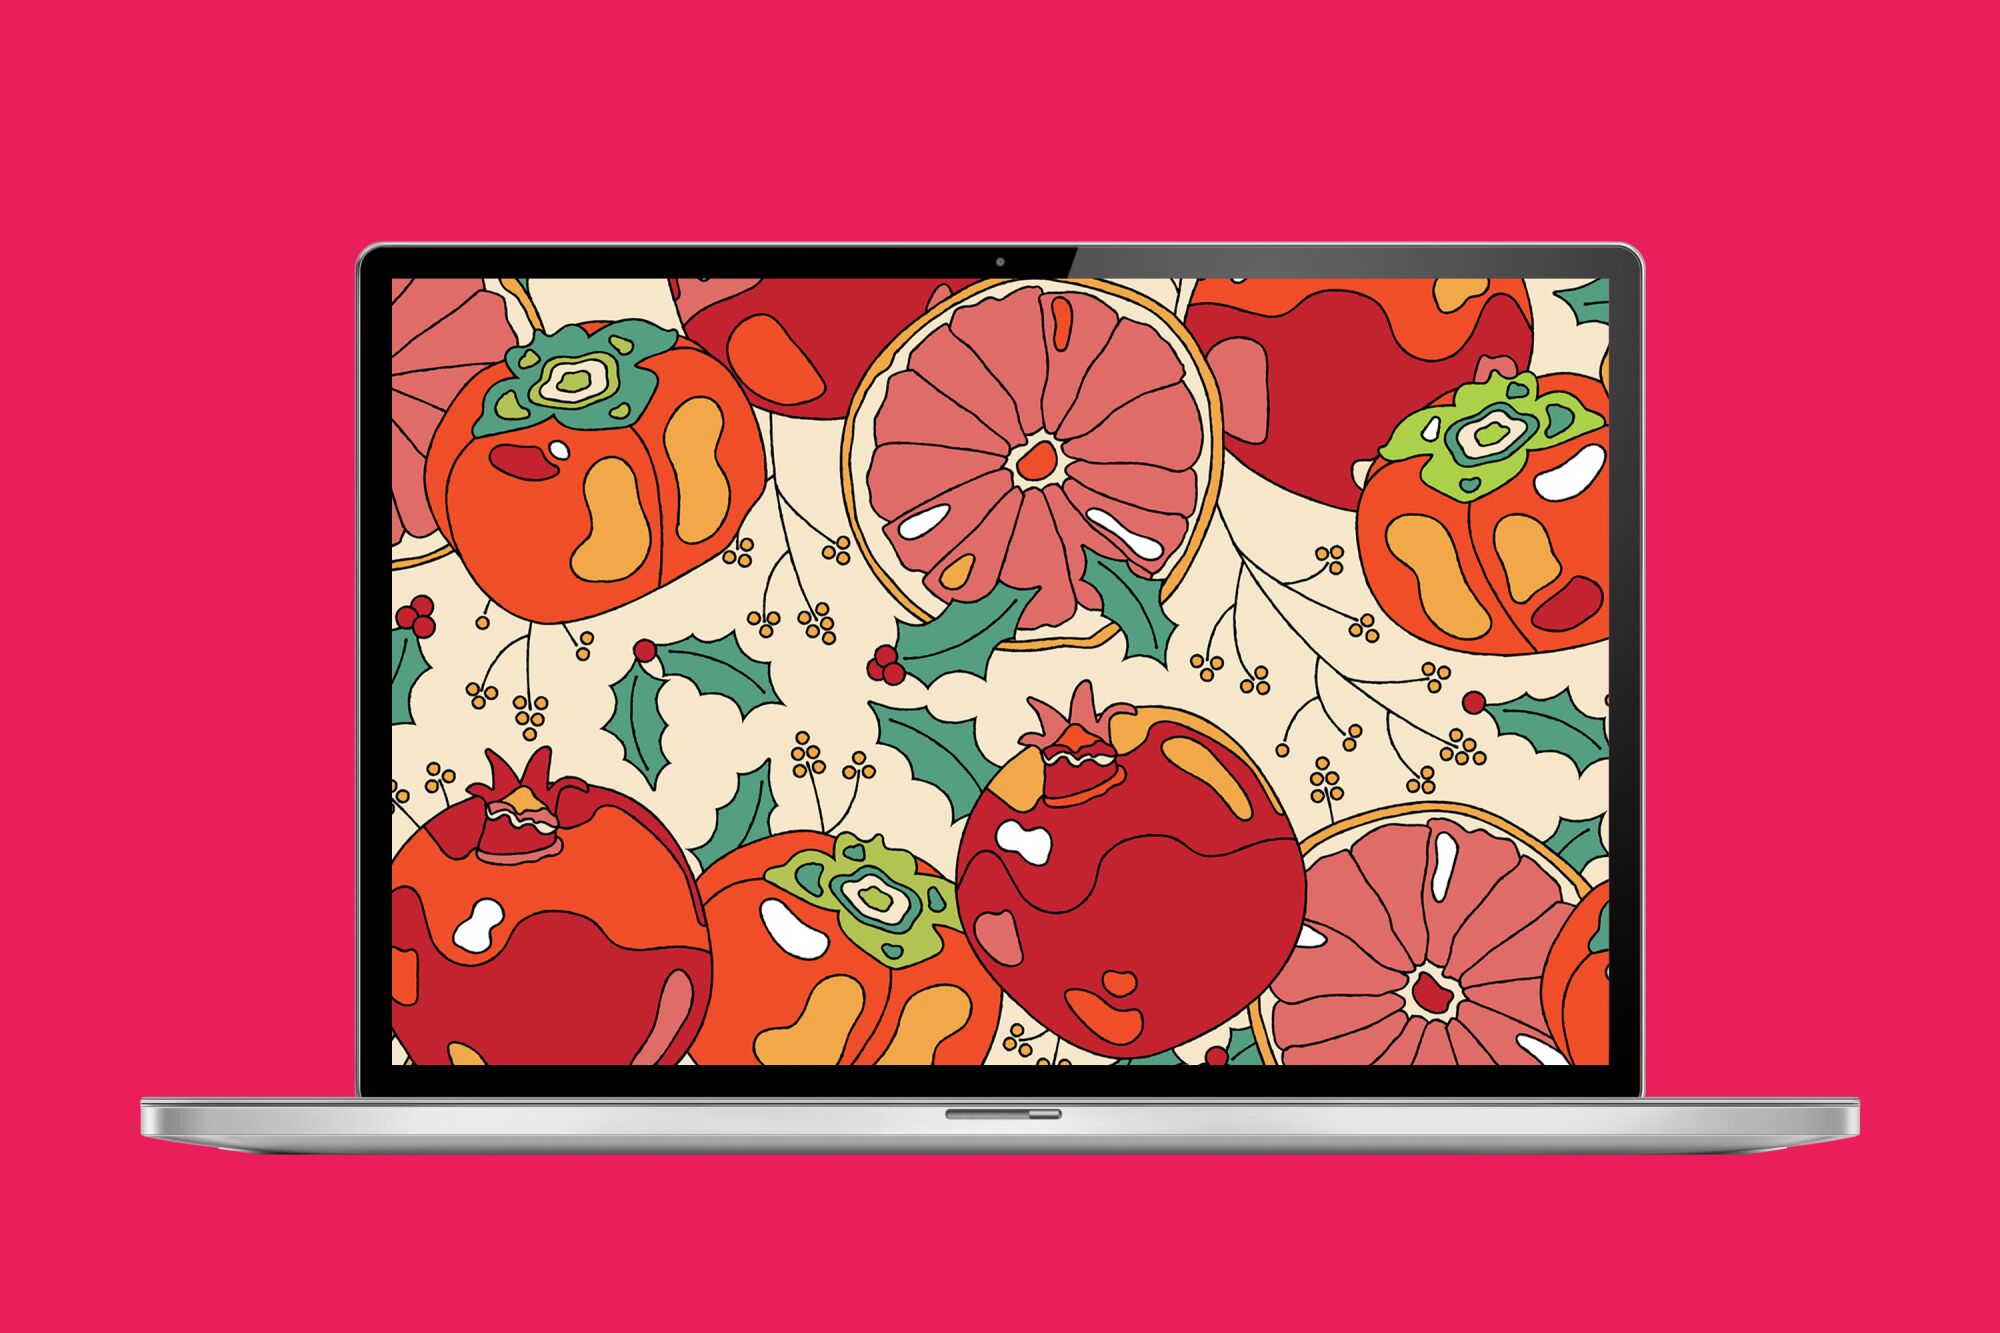 Mockup of a Zoom background with a pomegranate illustration.